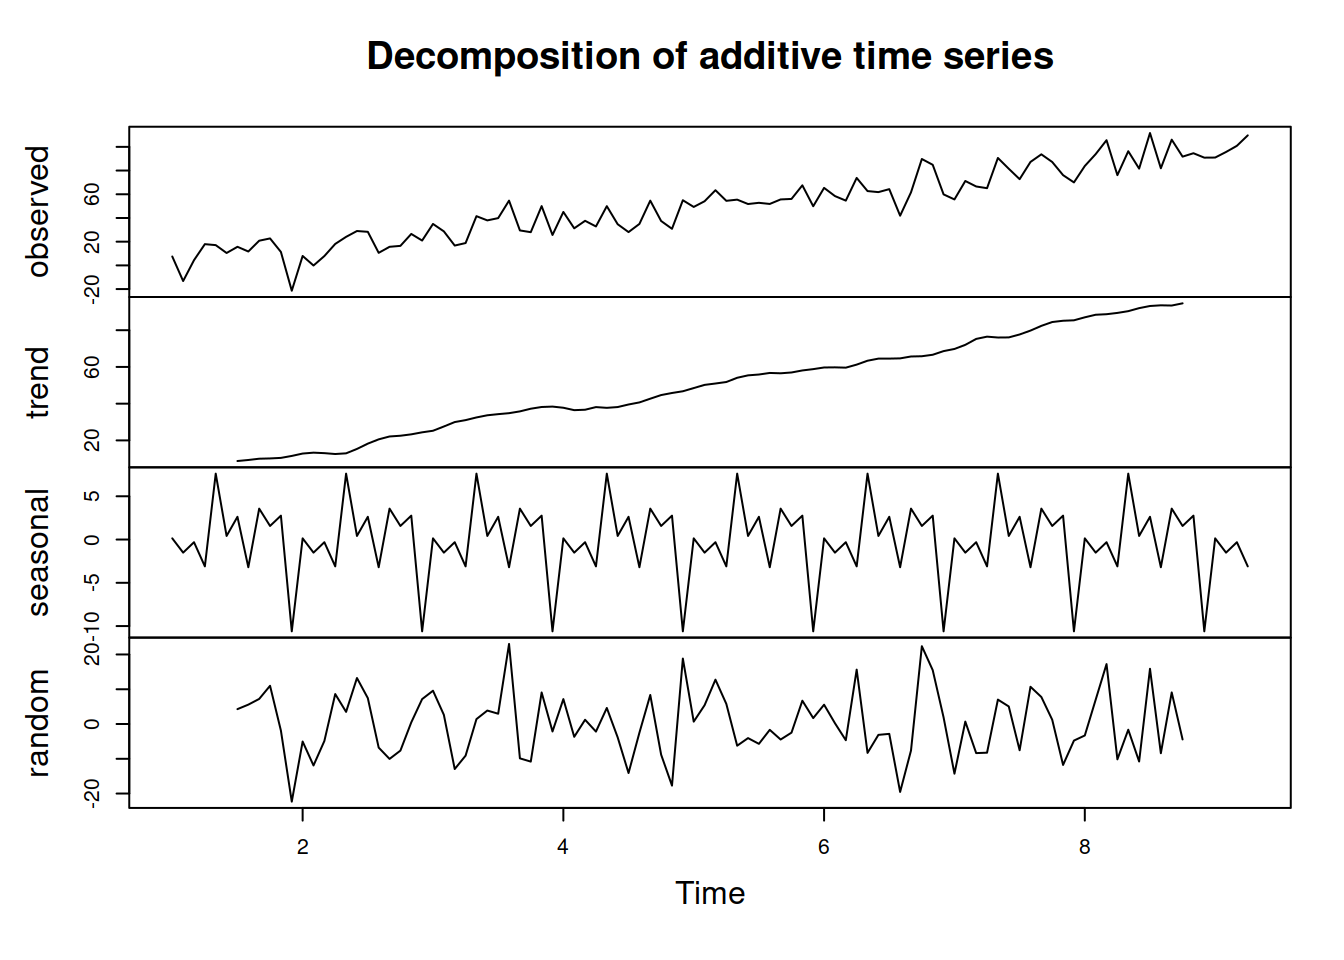 Decomposition of AirPassengers time series according to the additive model.